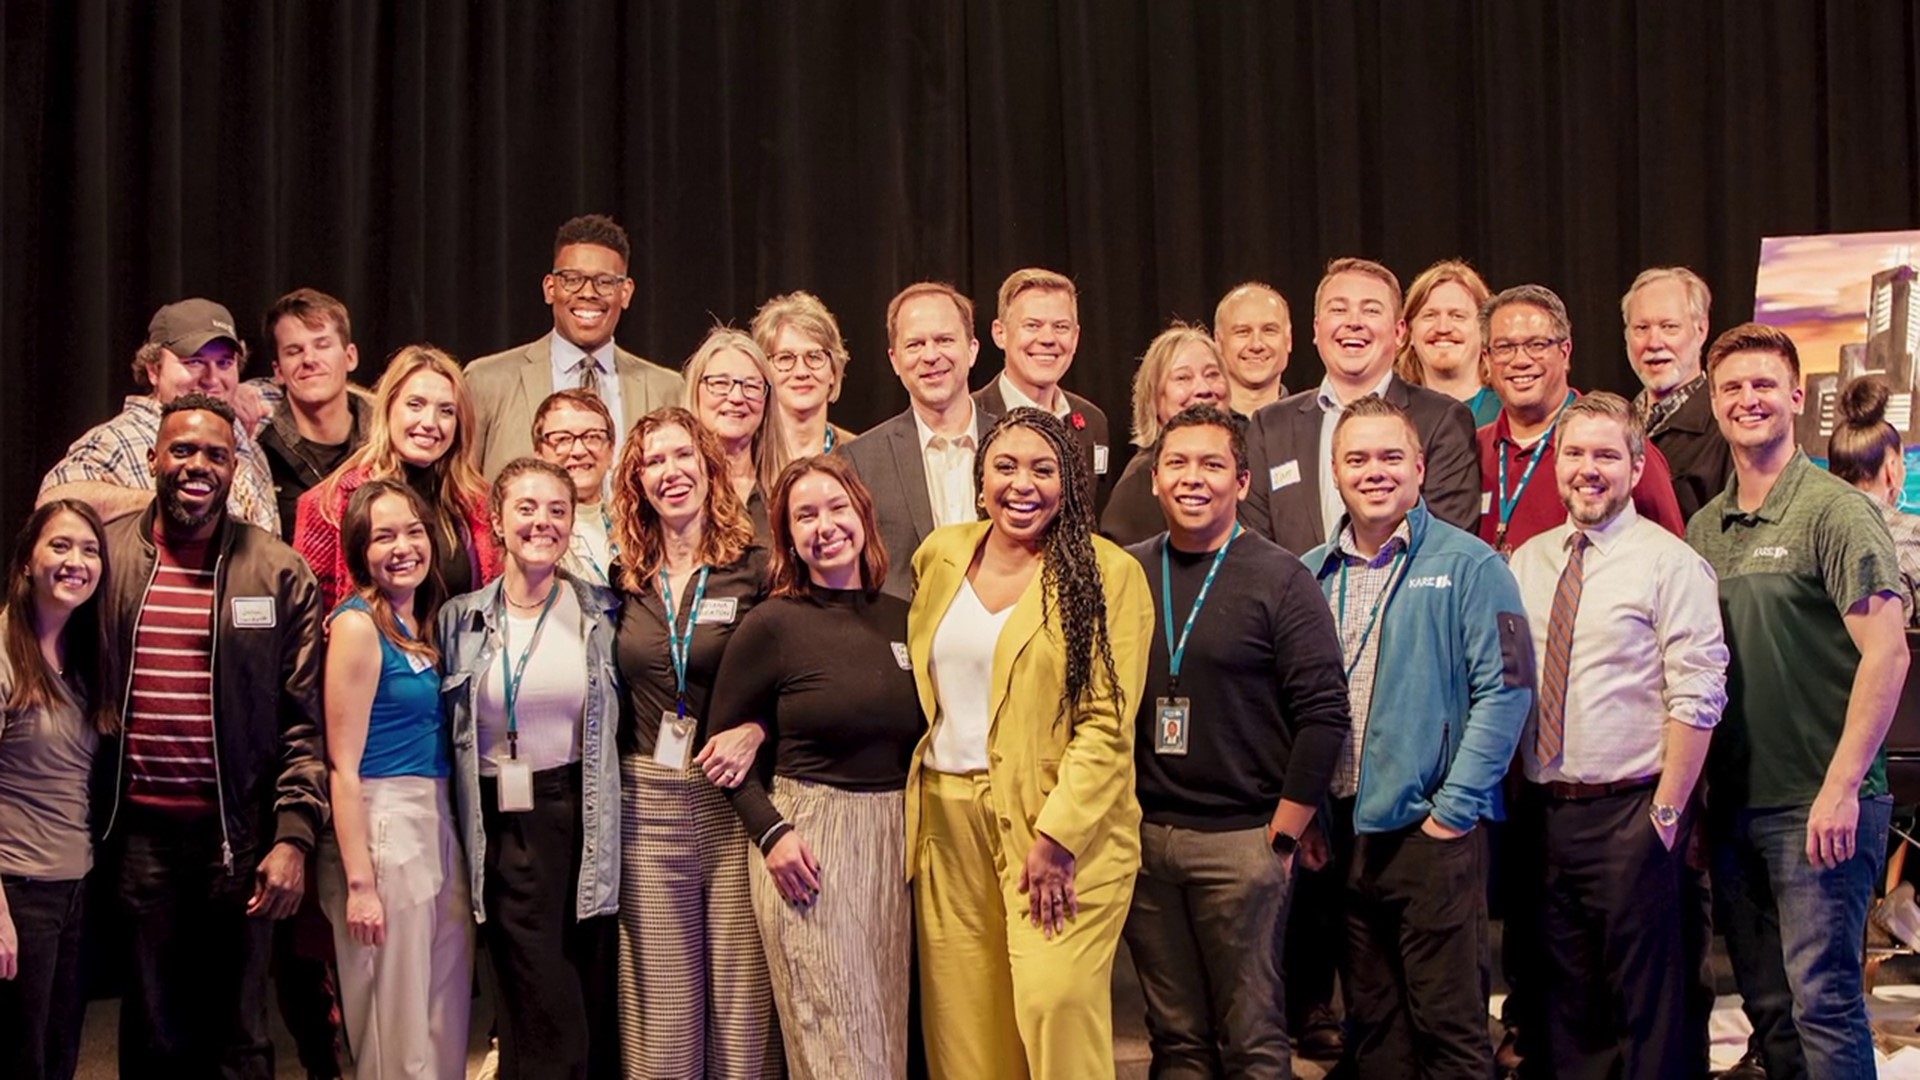 Leaders and stakeholders from Twin Cities area organizations joined KARE 11 to create community through connection.